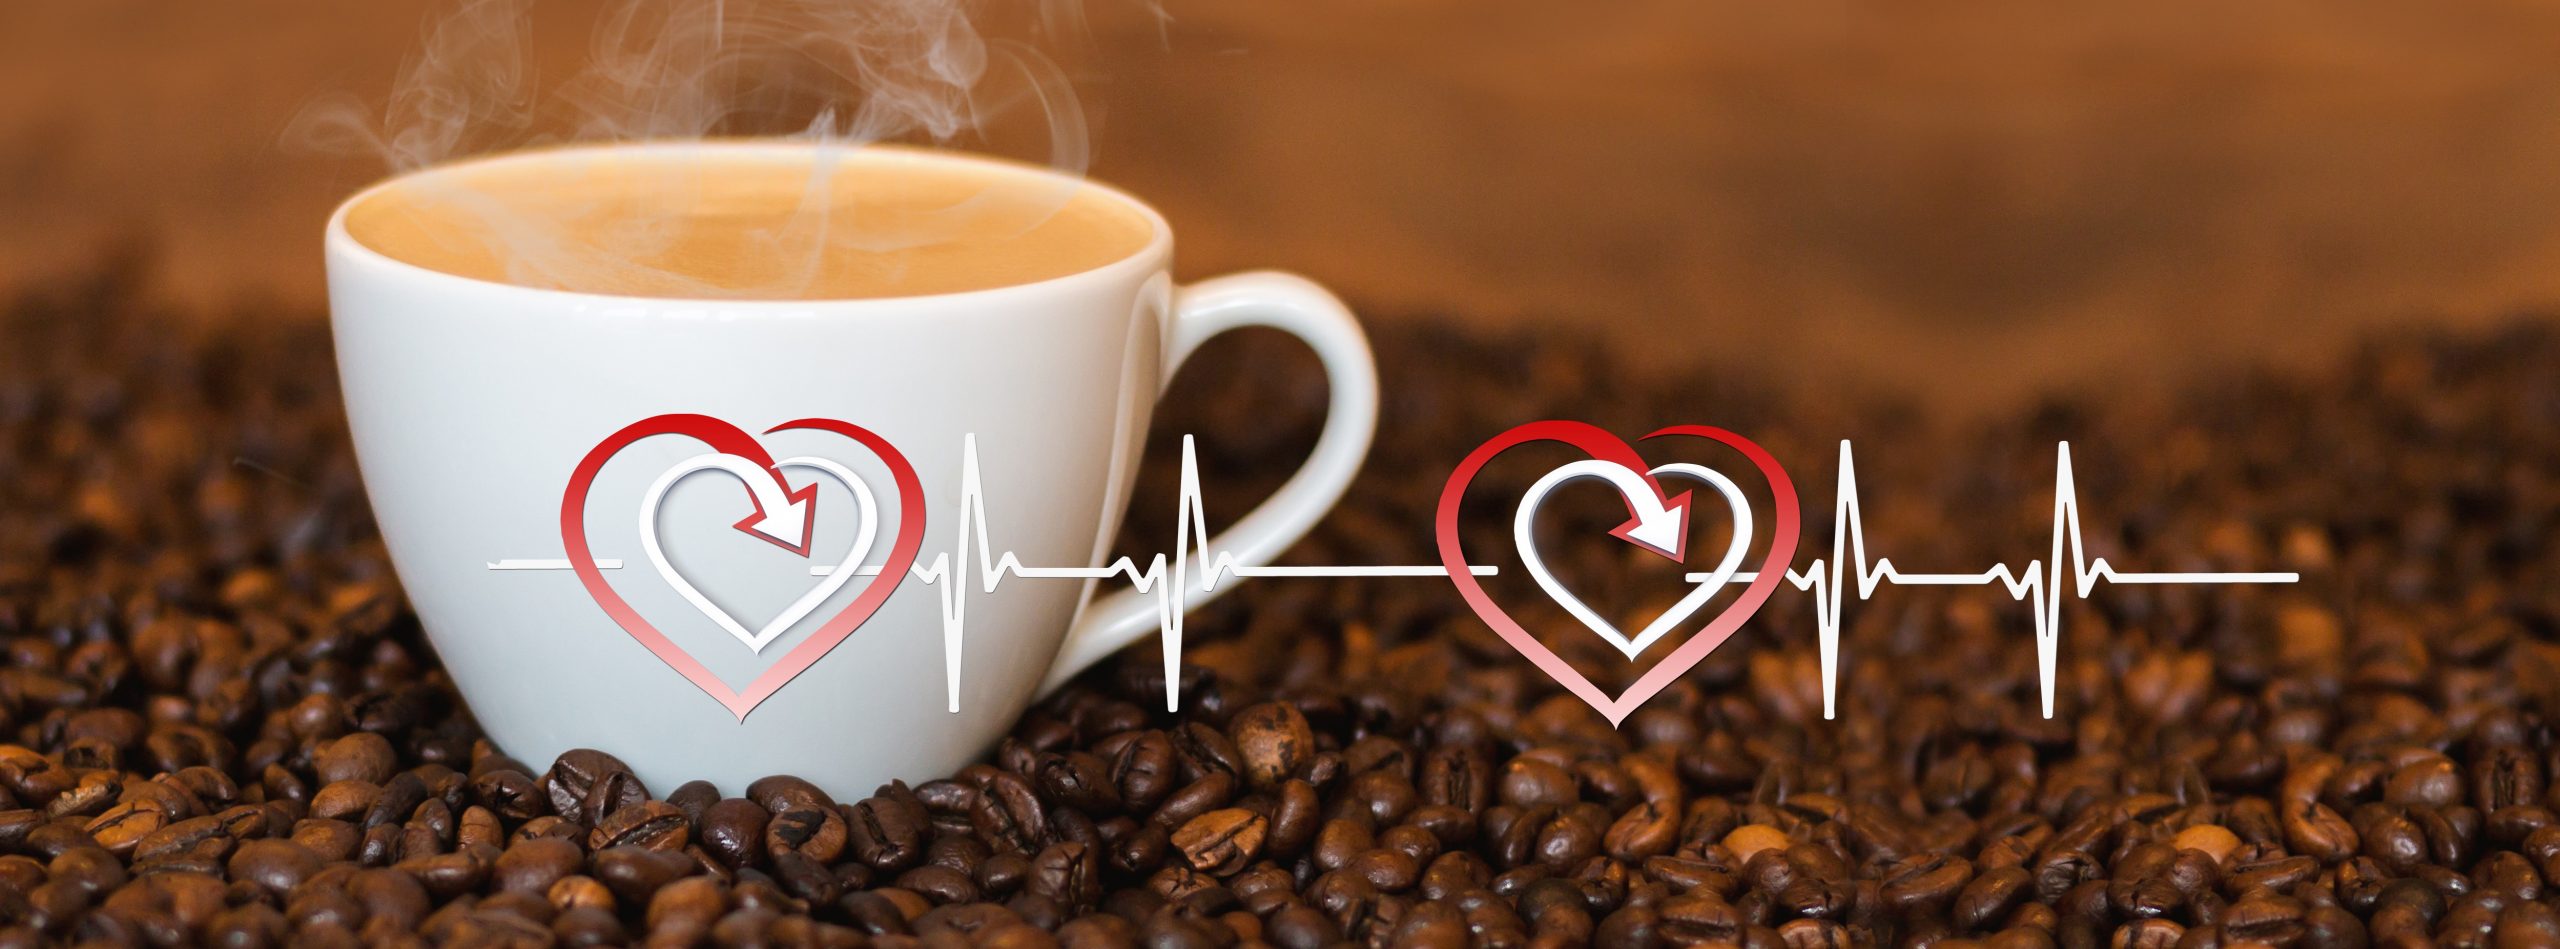 8 Effects of Caffeine on Heart- Is it Good or Bad?